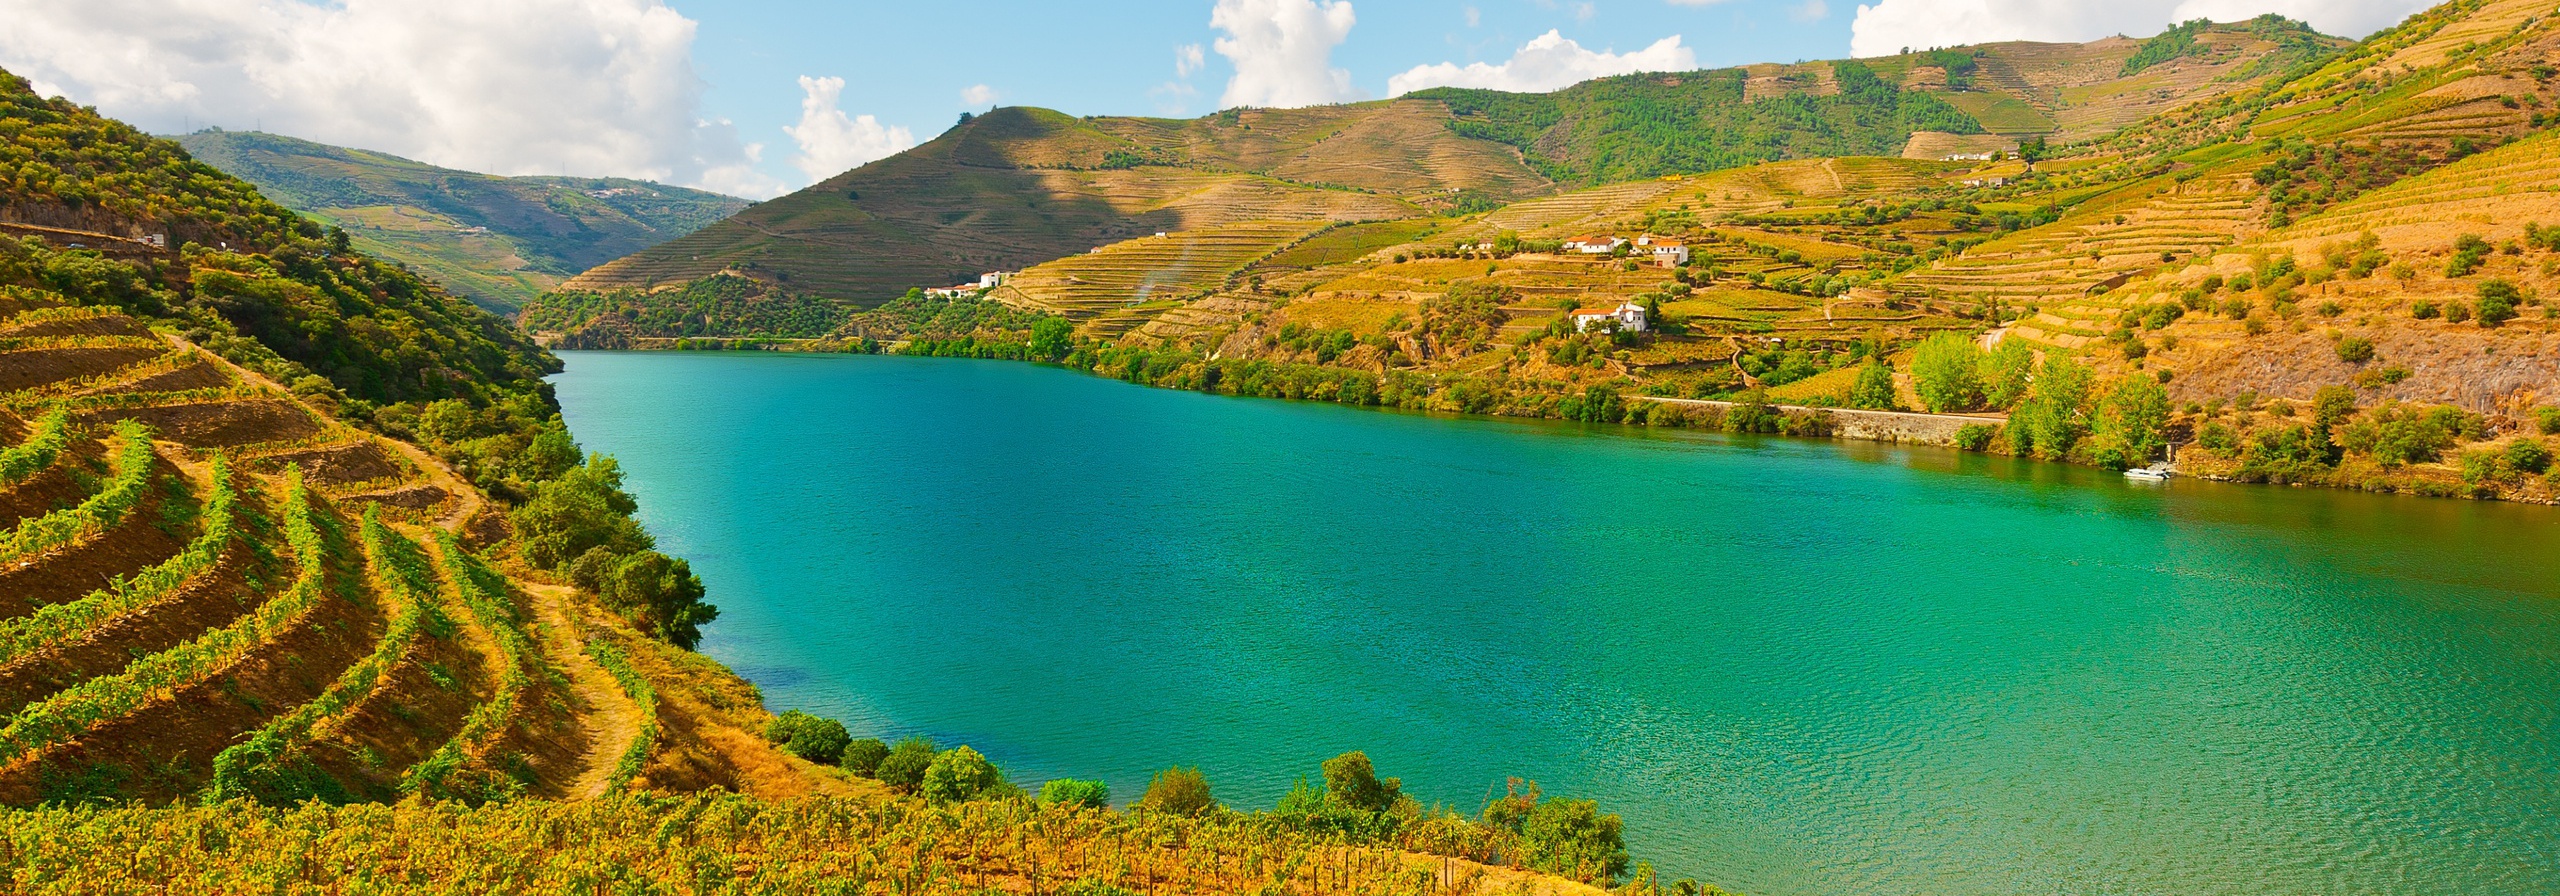 Banks of the Douro River